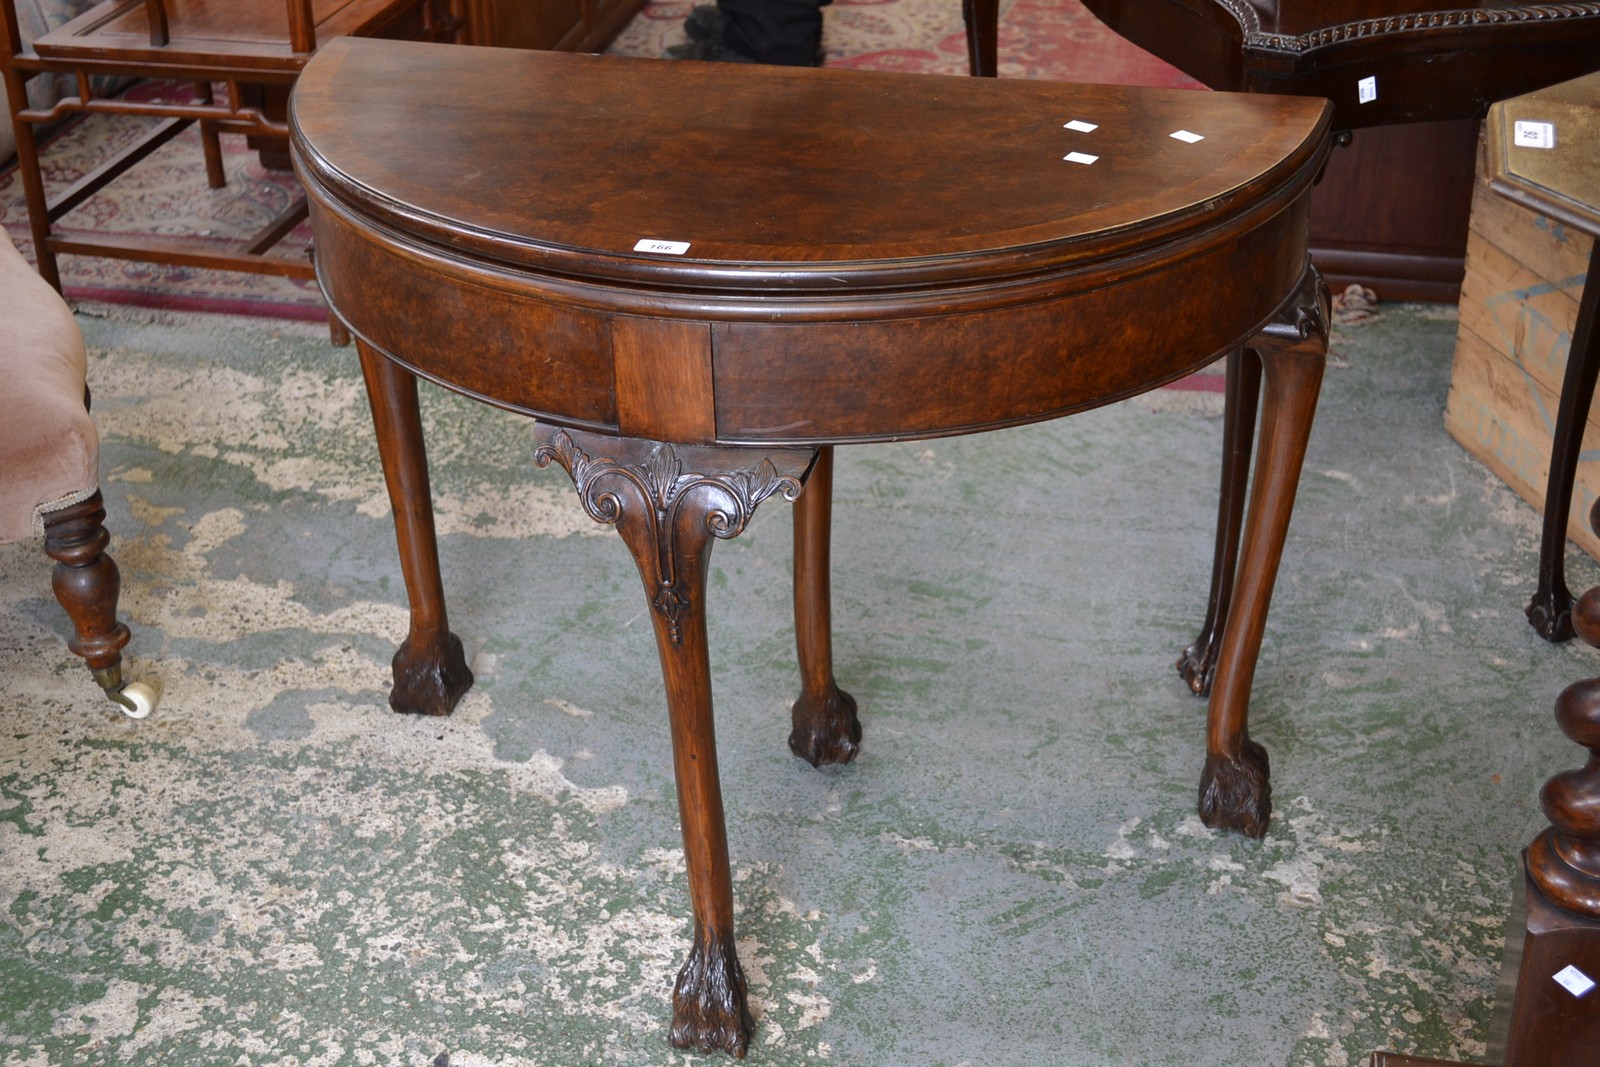 A mahogany and walnut demi lune card table c.1900, Henry Stone & Sons, Banbury.